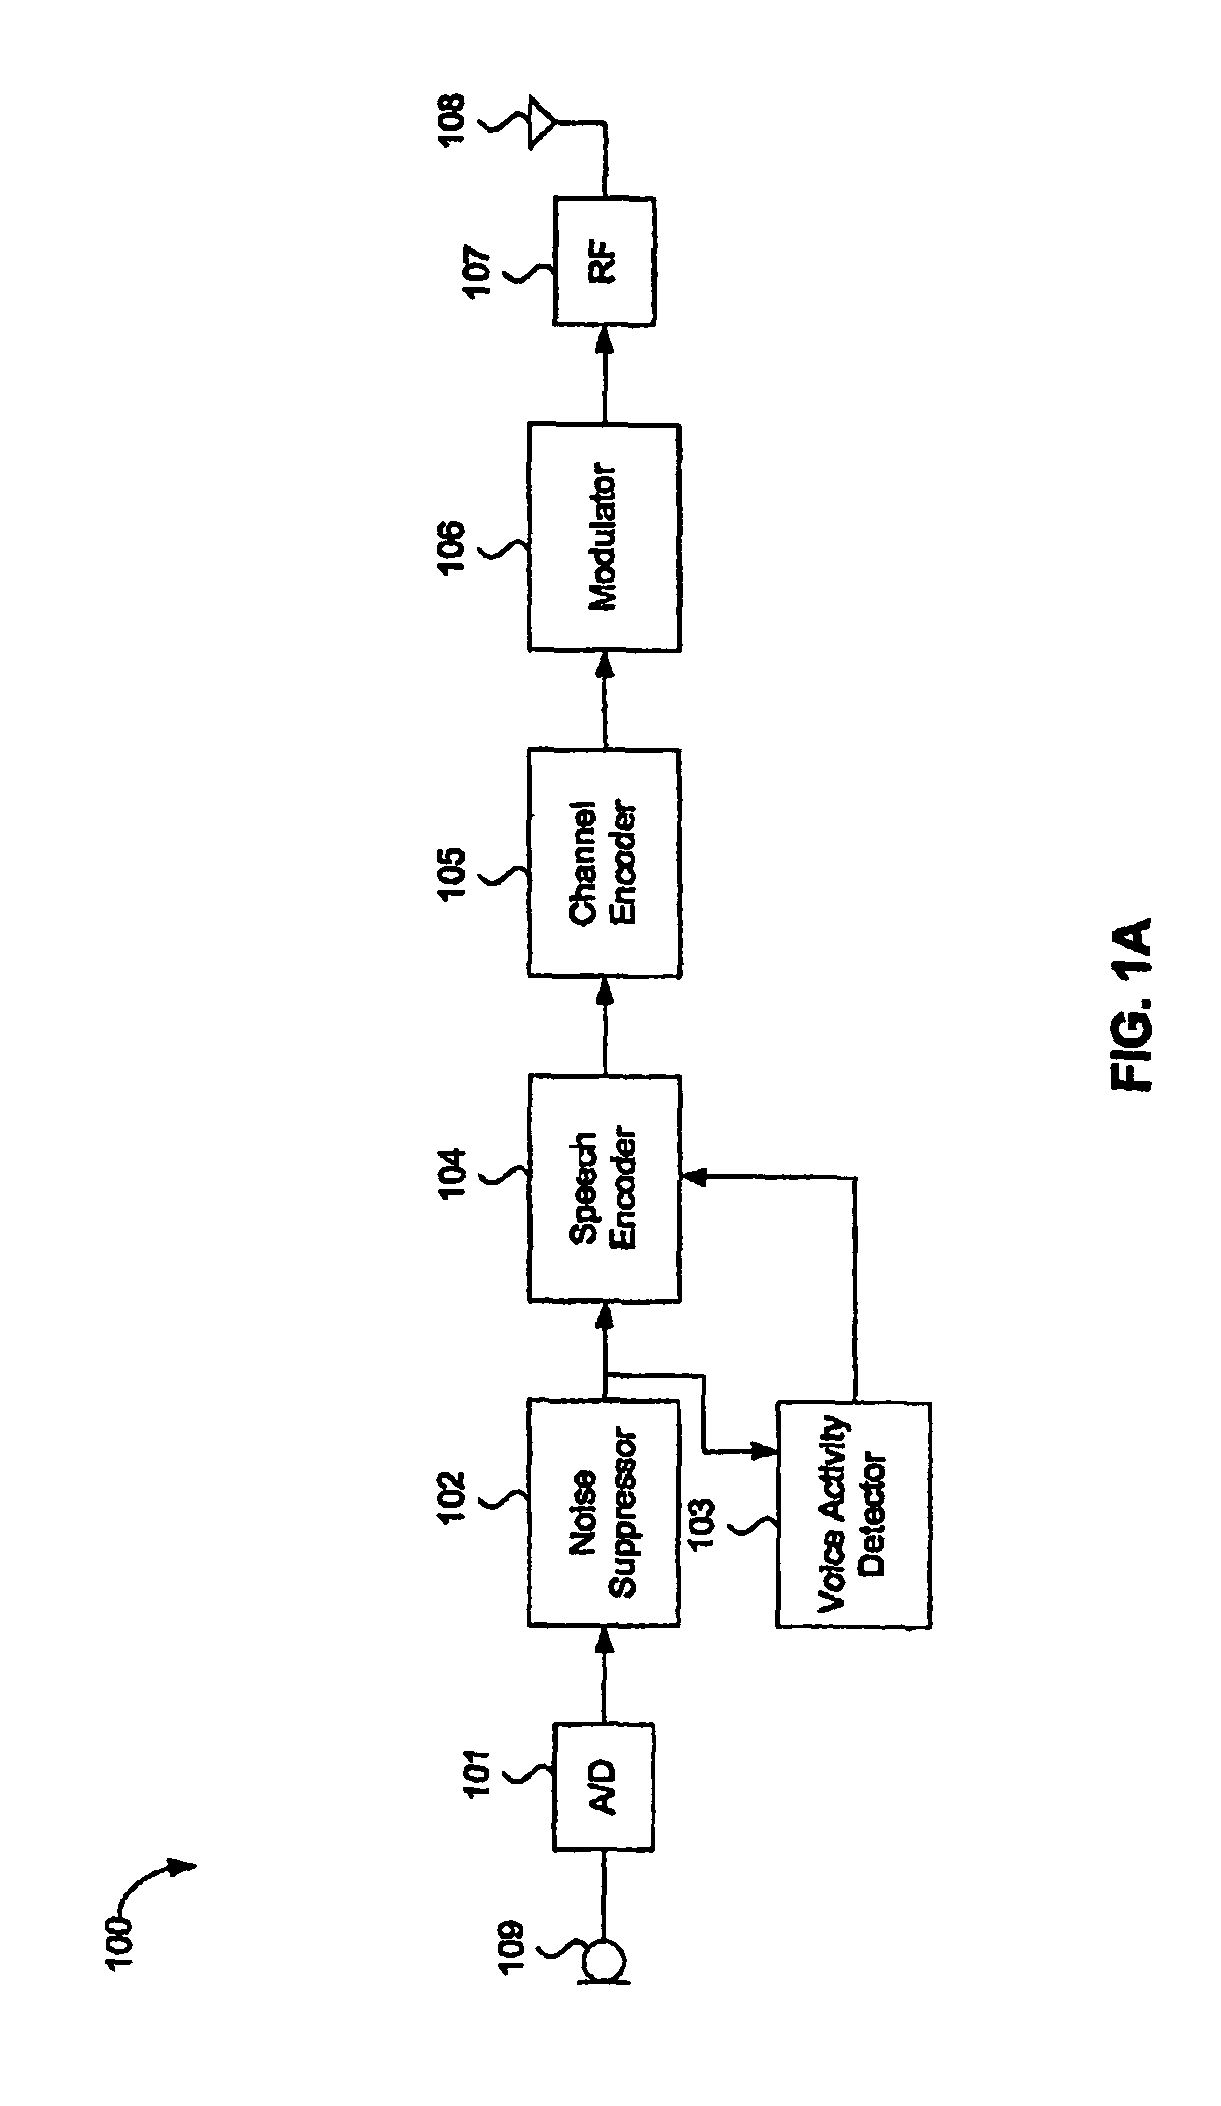 Wireless telephone with adaptive microphone array